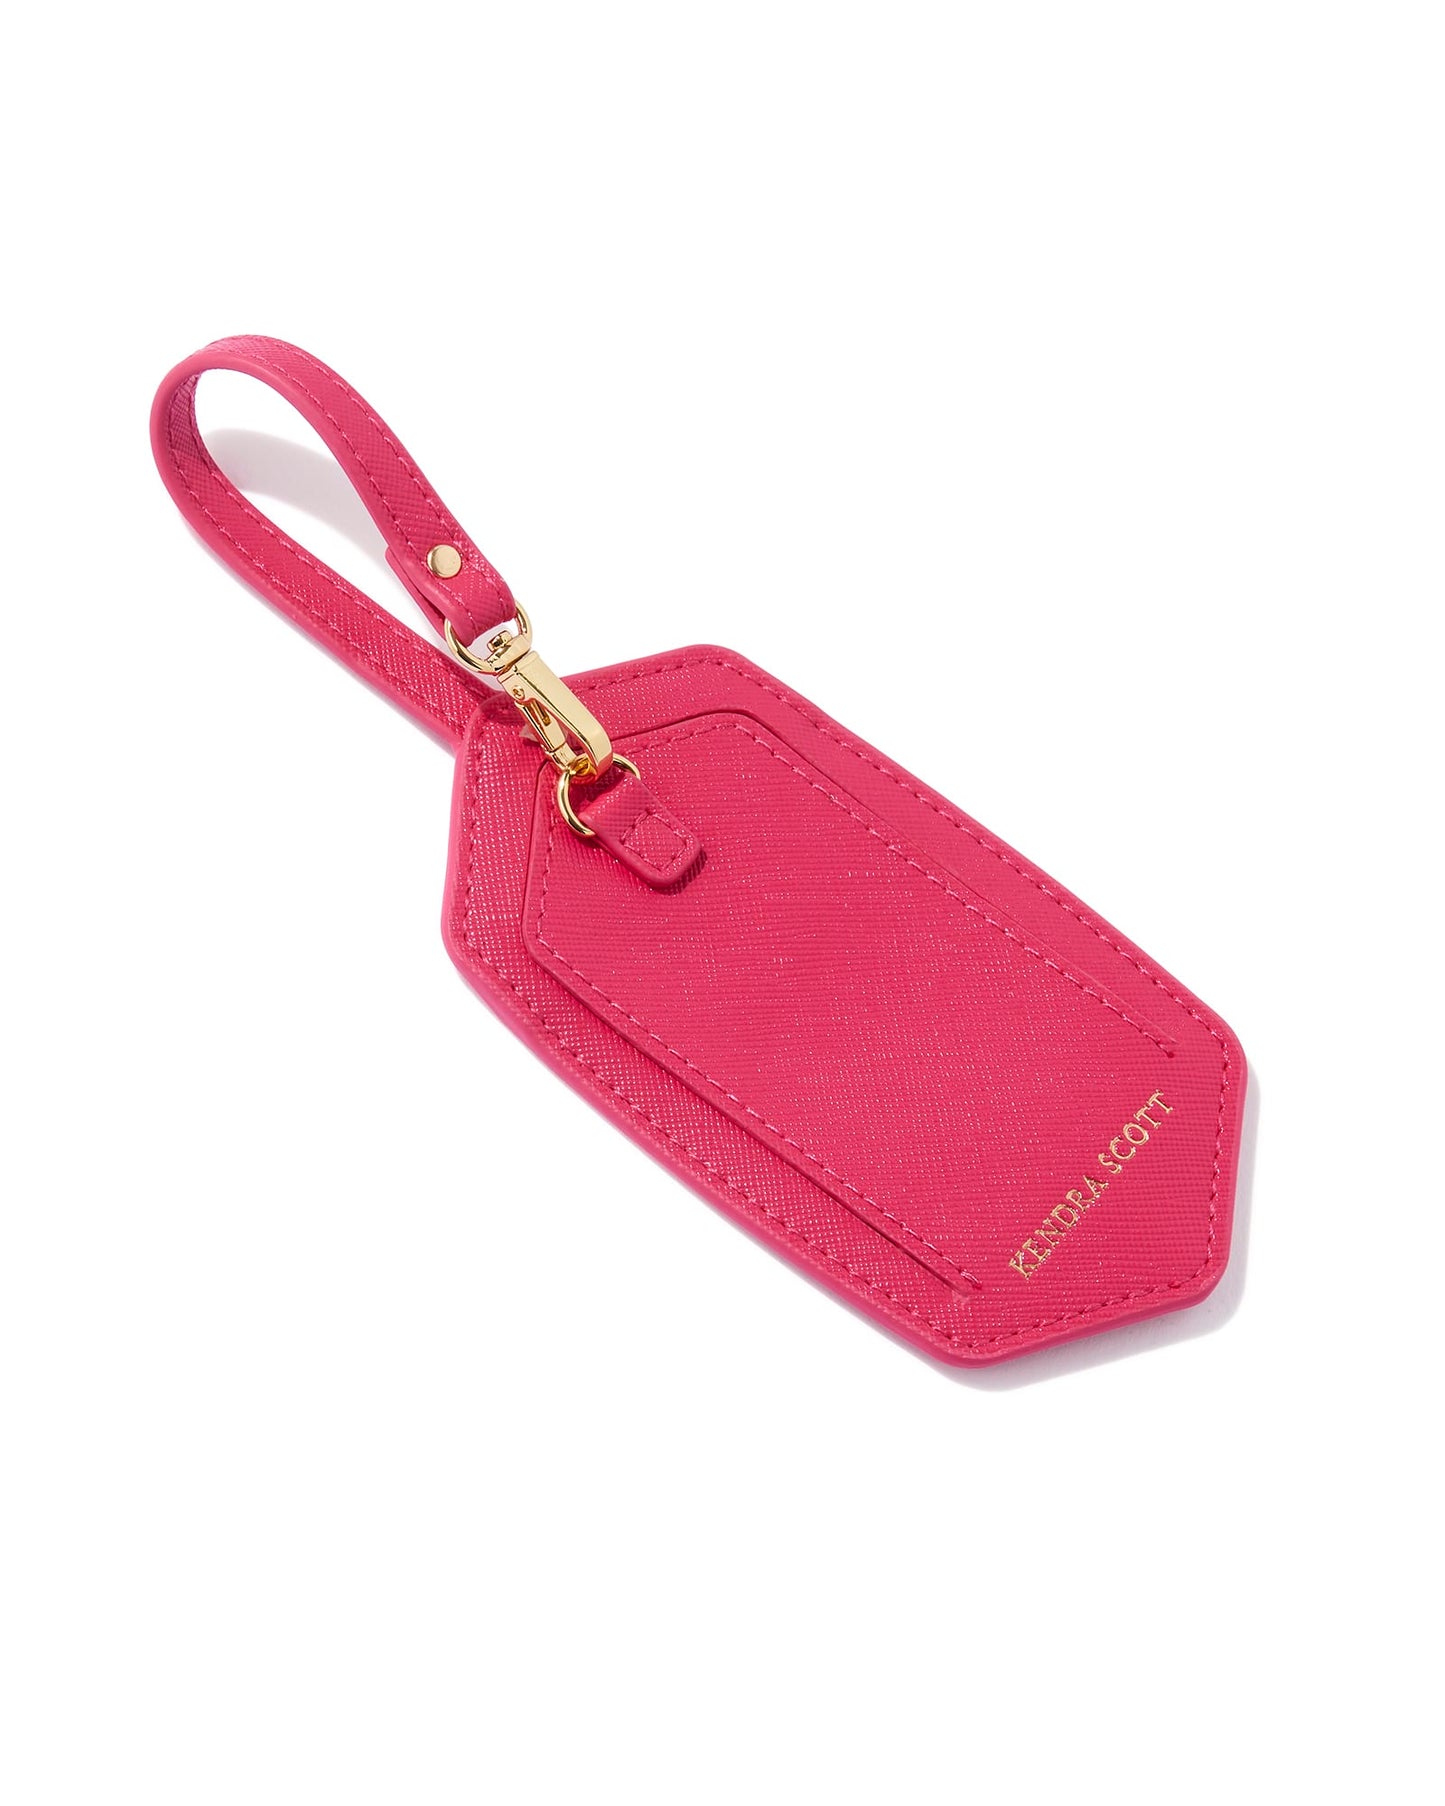 Hot pink luggage tag 2.5" X 5.11" (10.4" with strap)